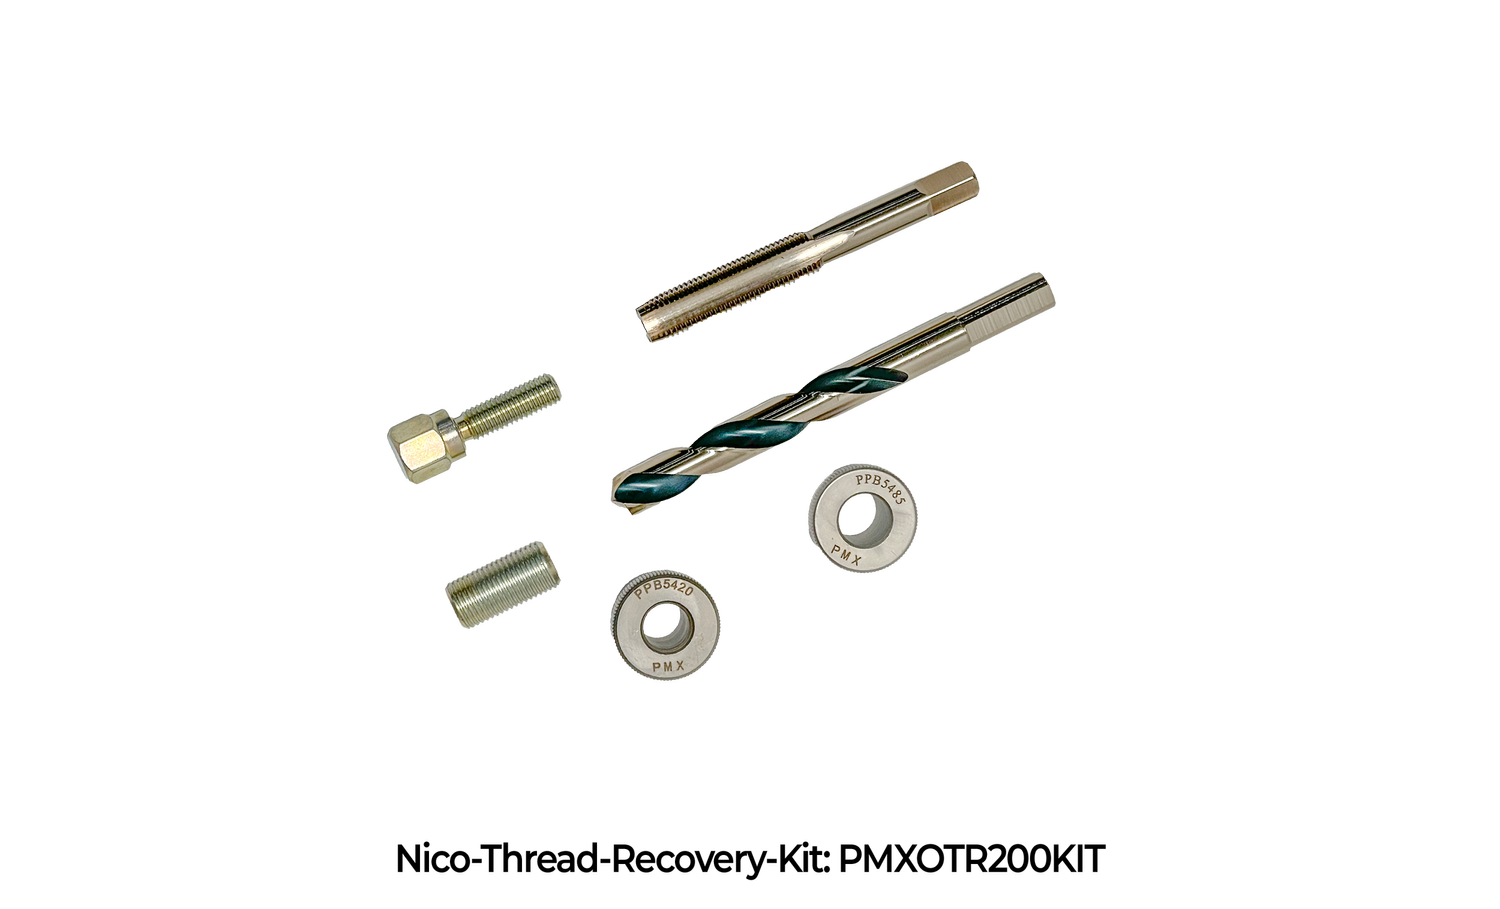 Ford 6.7L Power Stroke Fuel Injector Bolt (Nico) Thread Repair Extension Kit